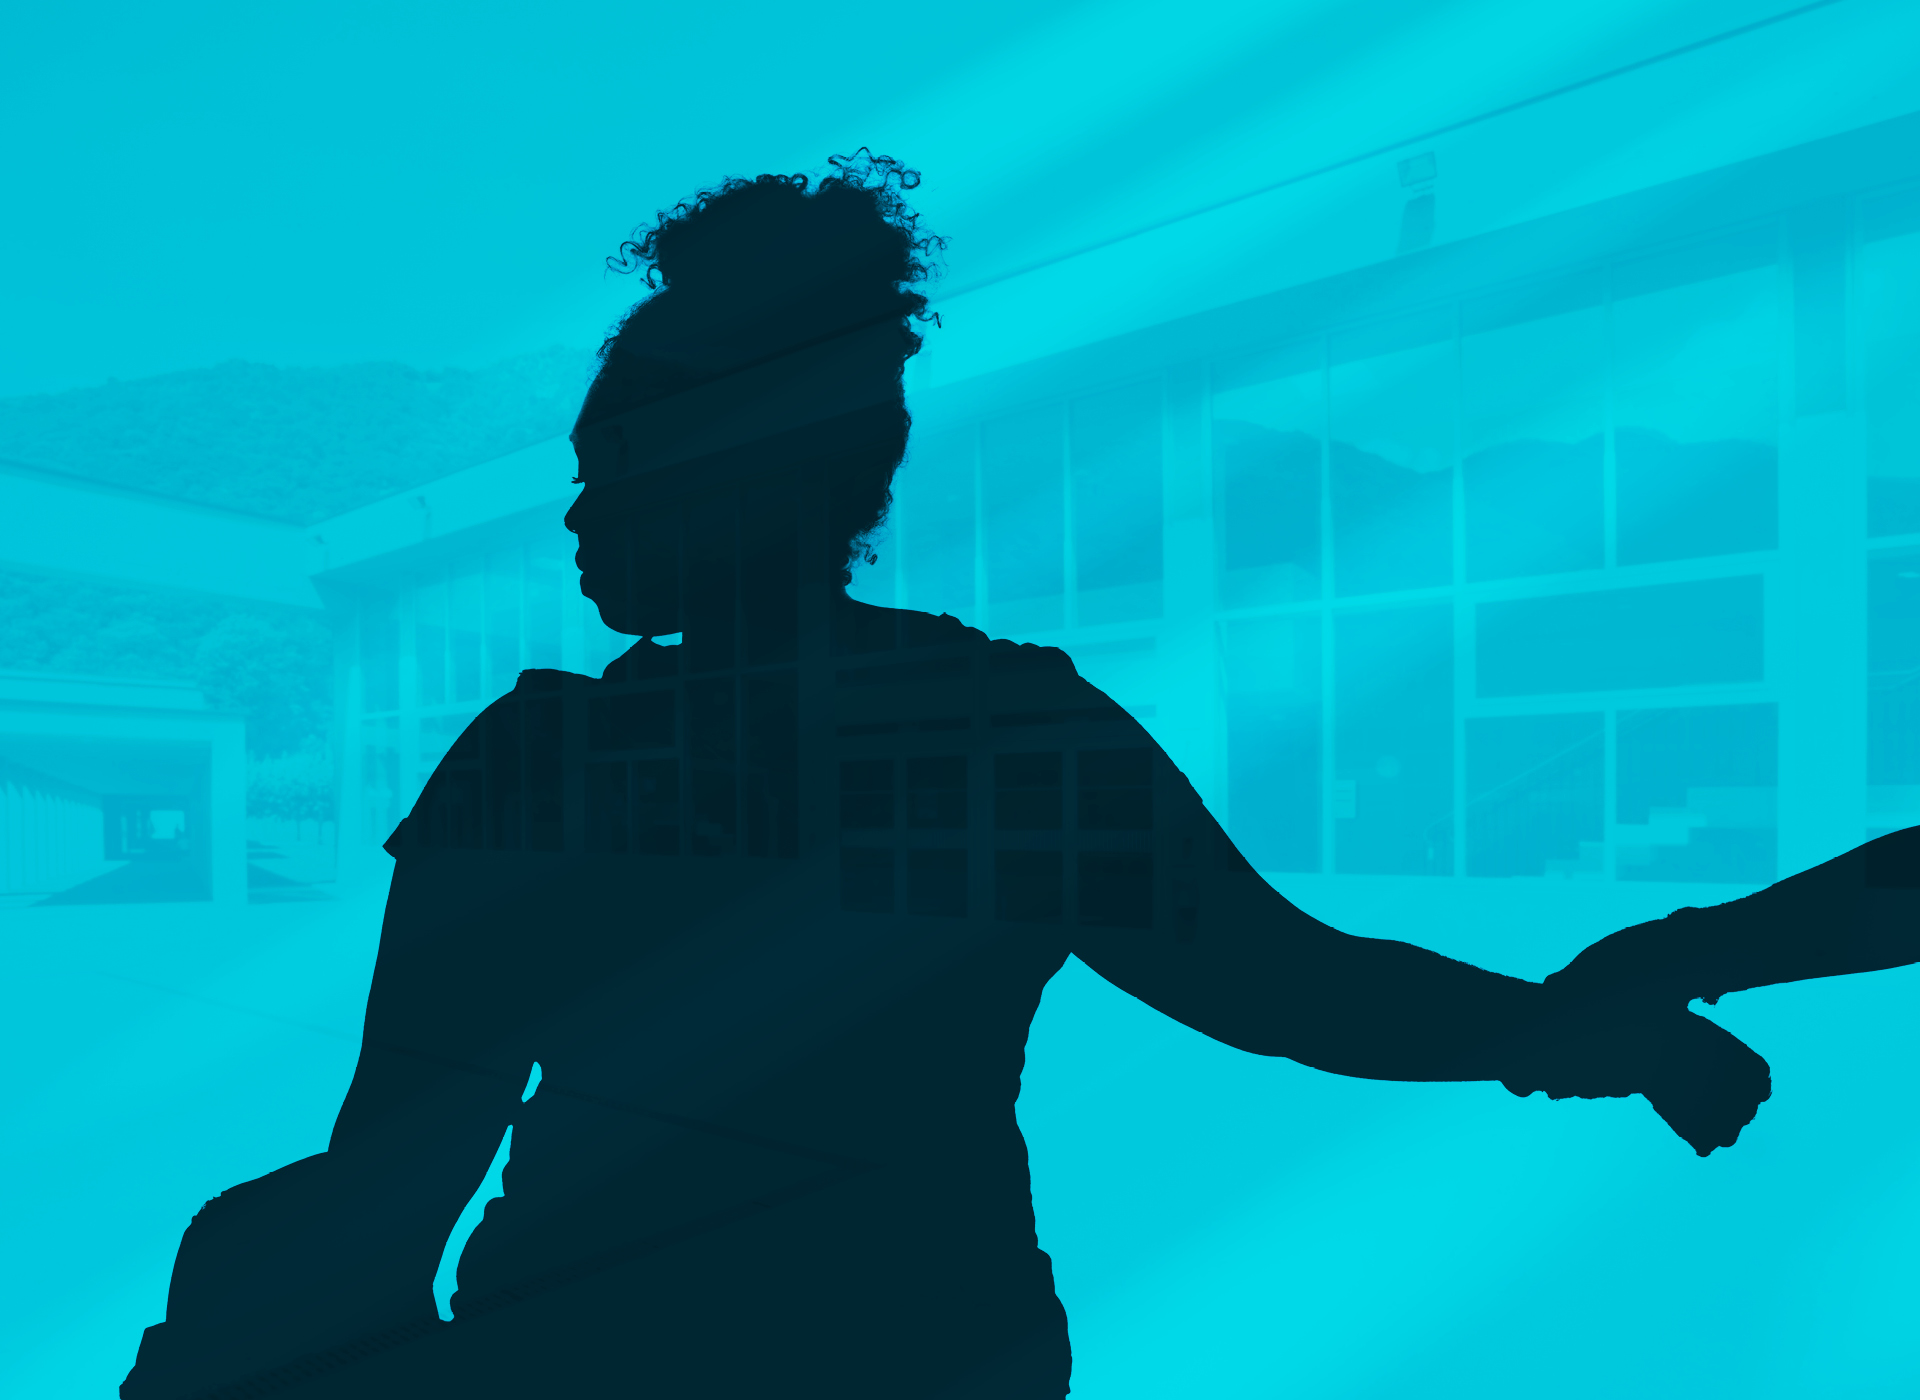 silhouette of teen girl being pulled away by unknown figure against blue background